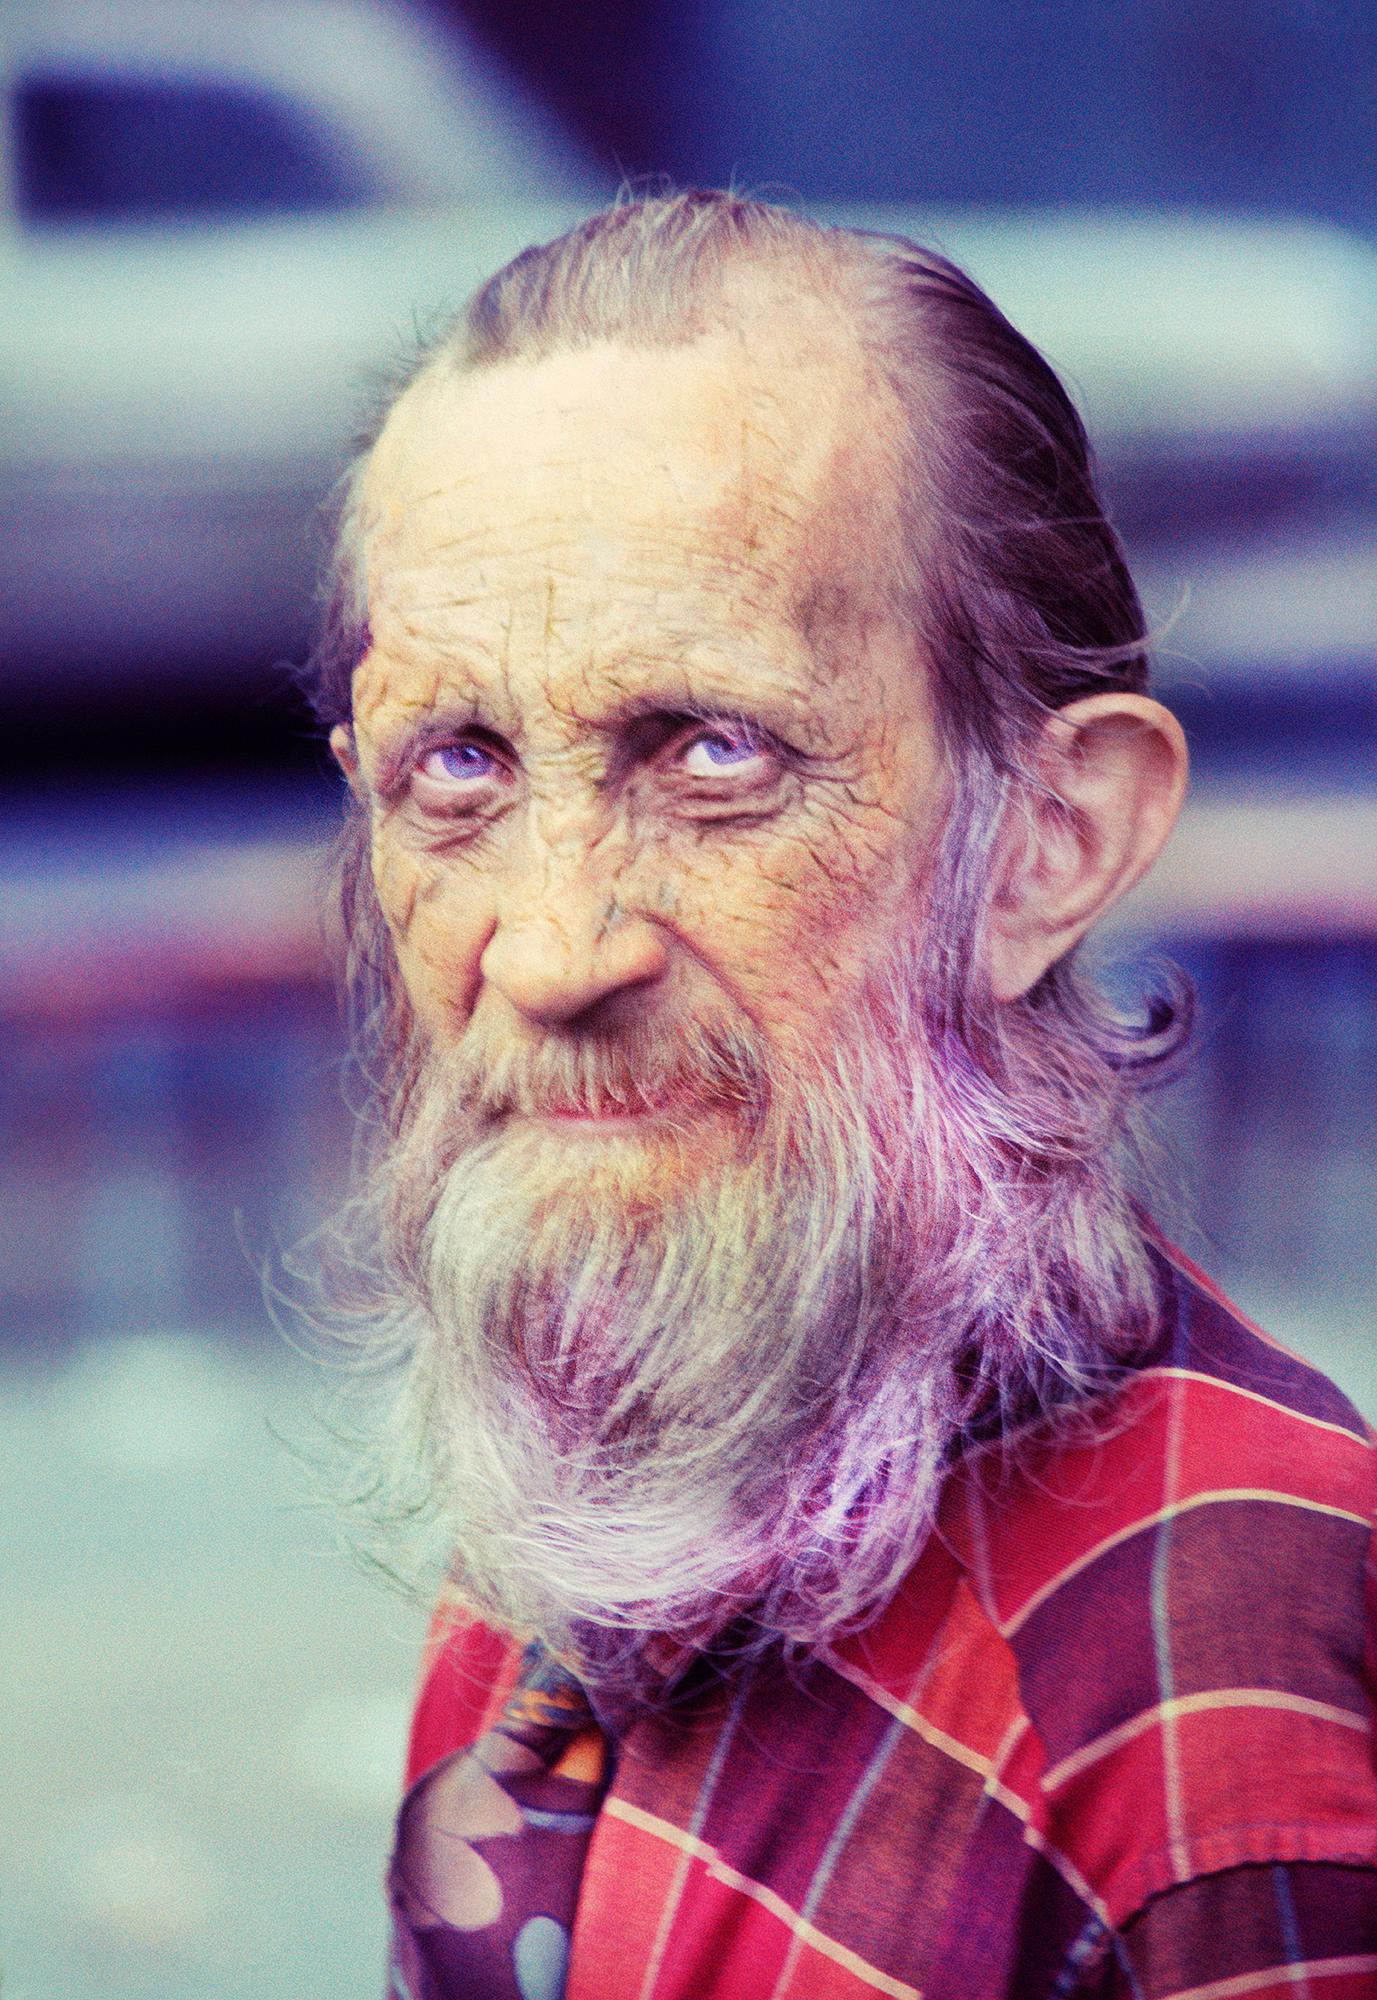 Mitchell Funk Figurative Photograph - Skid Row Bowery Street Portrait  - The Streets of New York